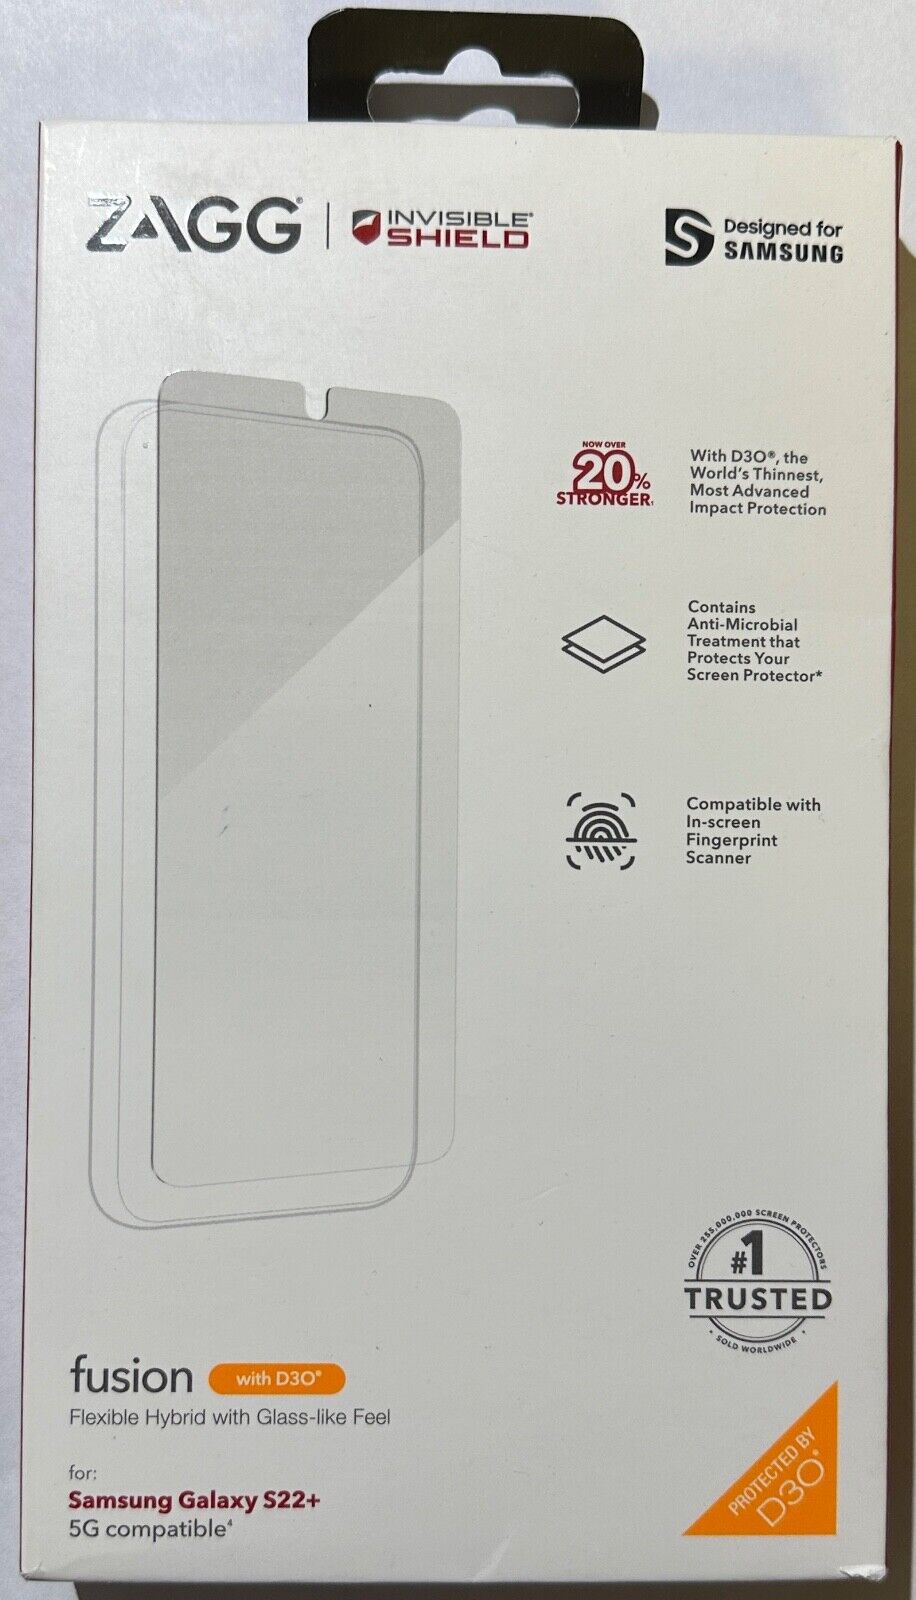 ZAGG Invisibleshield Fusion D30 Screen Protector for Samsung Galaxy S22+ PLUS